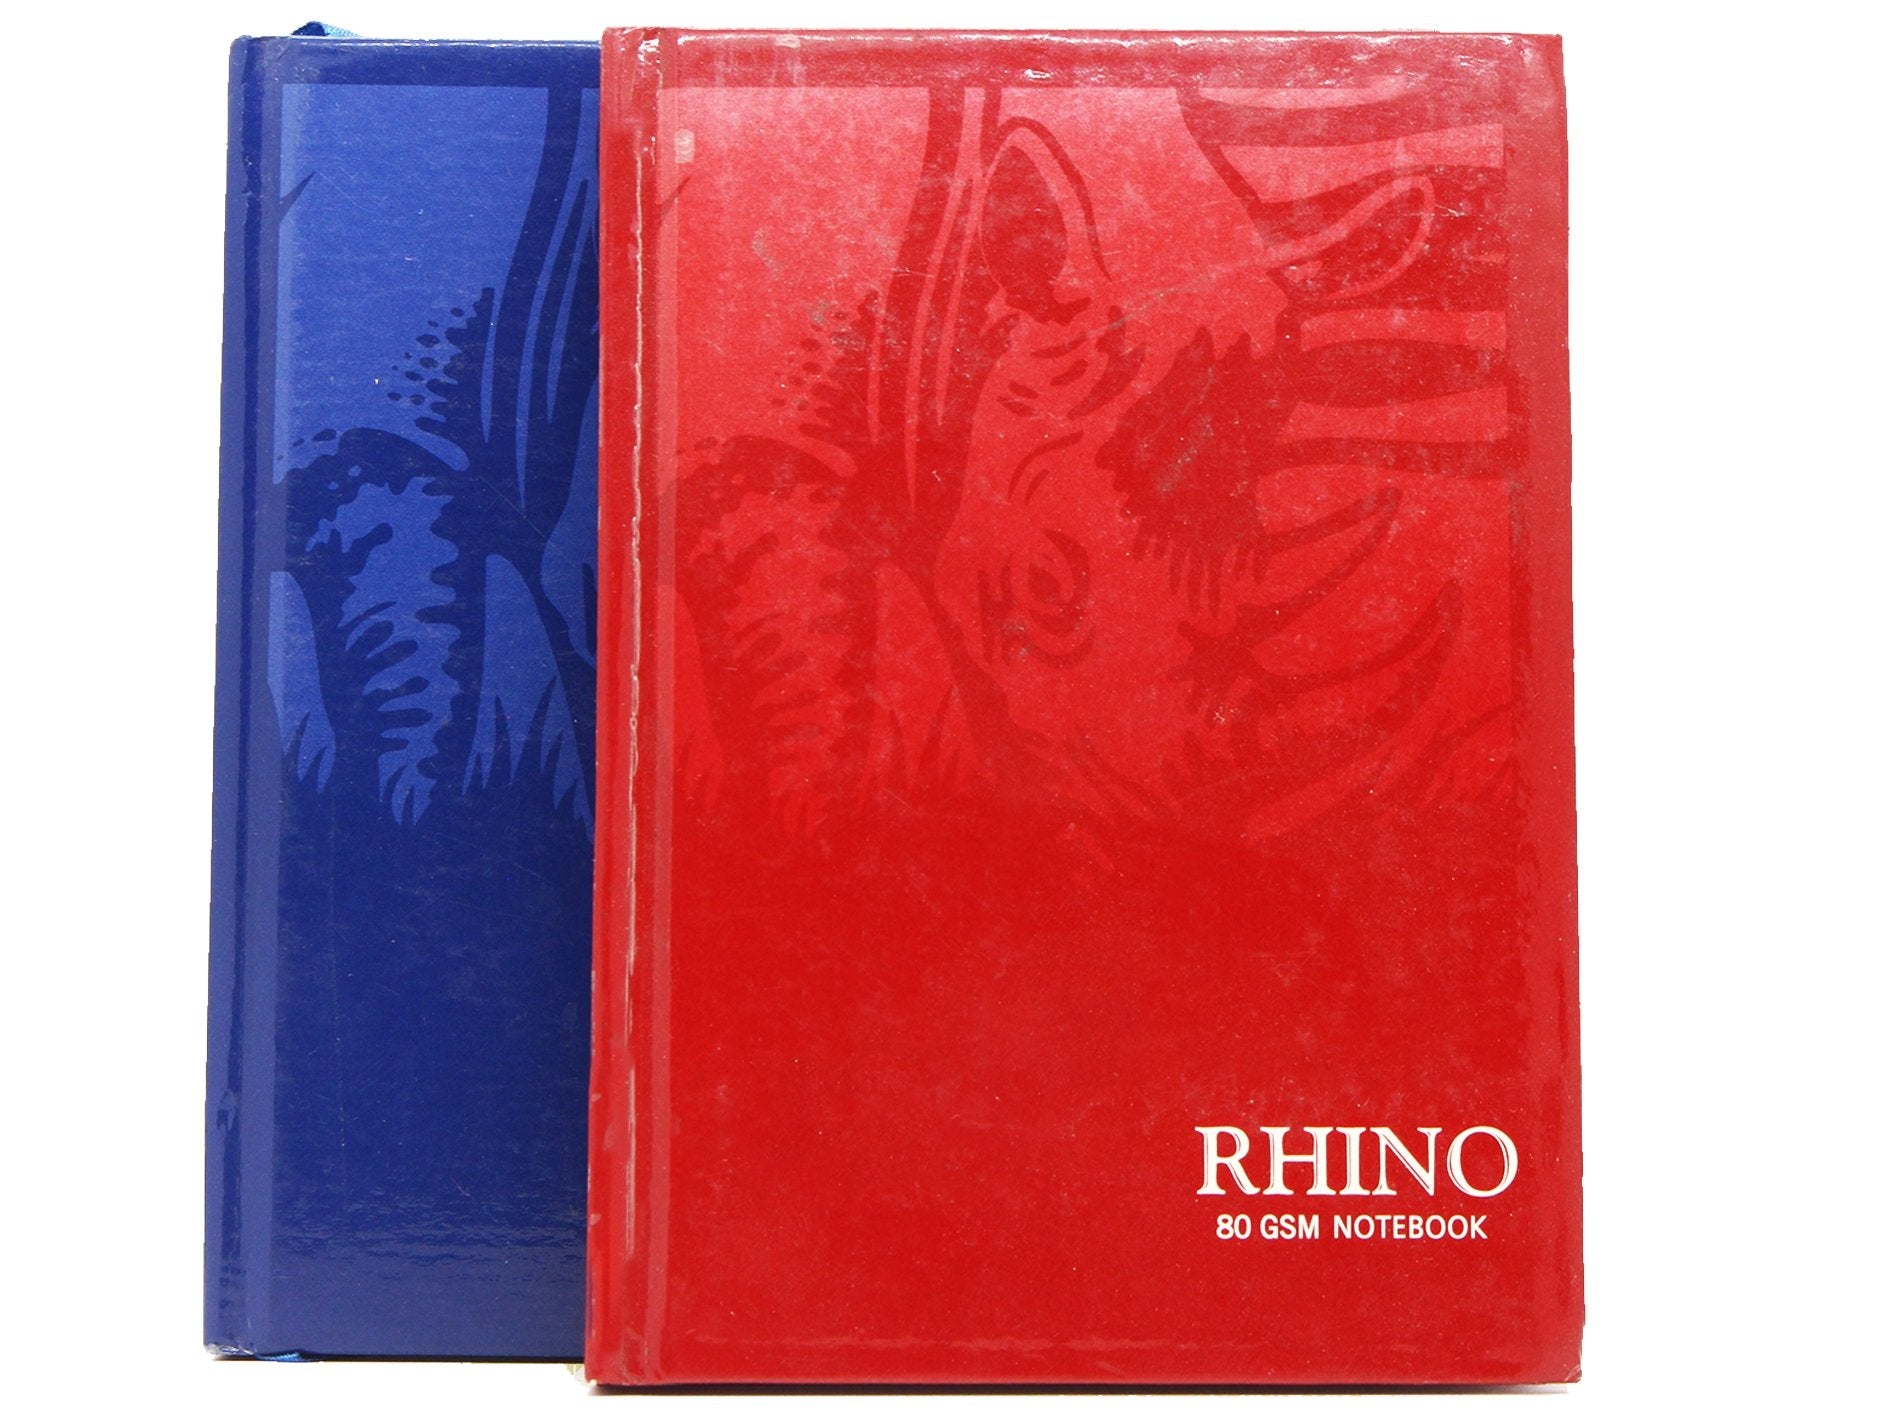 A6 RHINO Case Bound Blue Or Red Books 5 Pack - VIR Wholesale